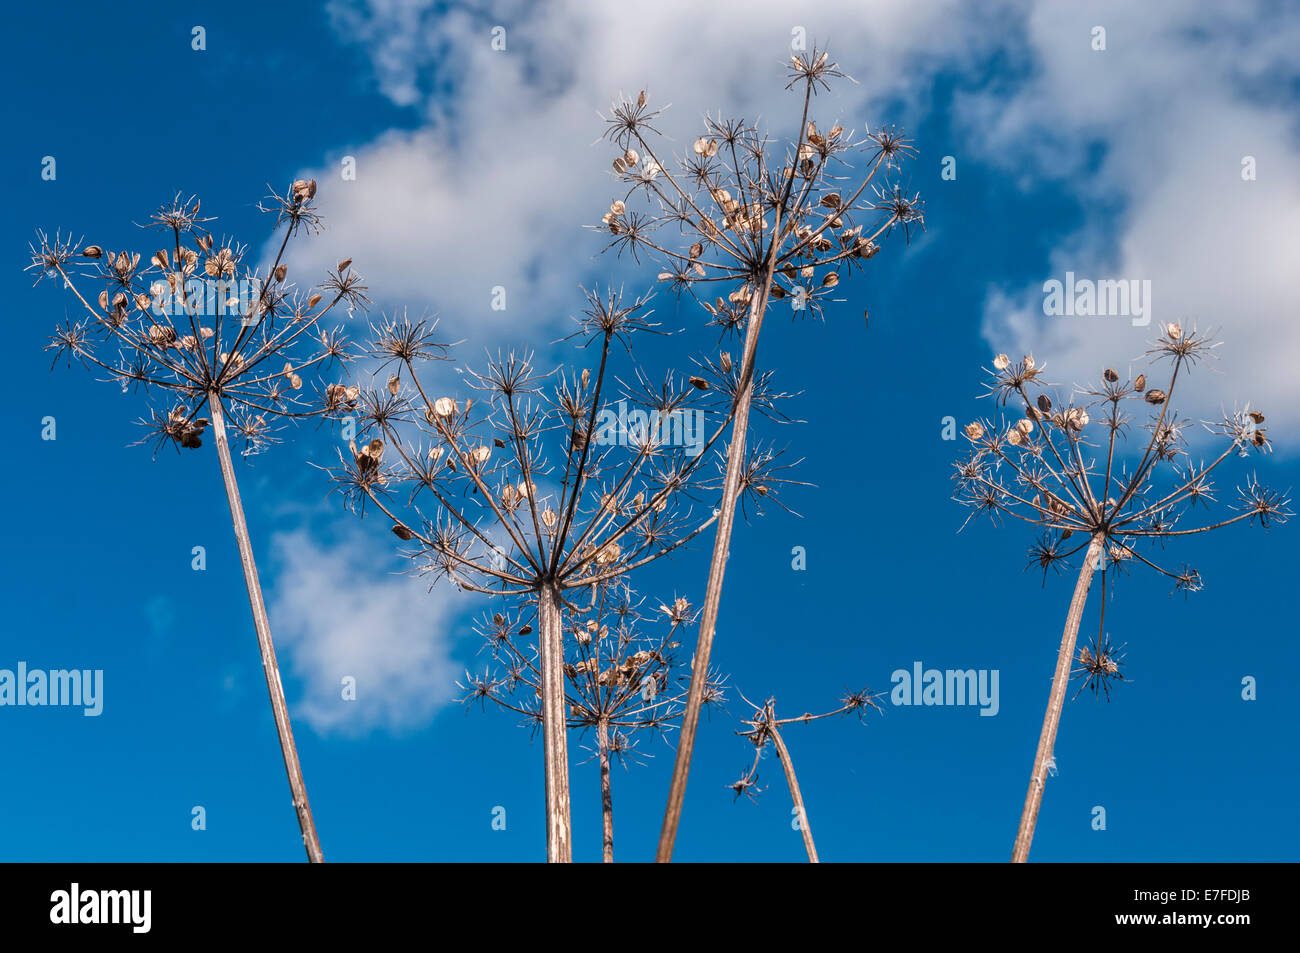 Dead seed heads of the Cow Parsley plant, Anthriscus sylvestris, against a blue autumn sky Stock Photo